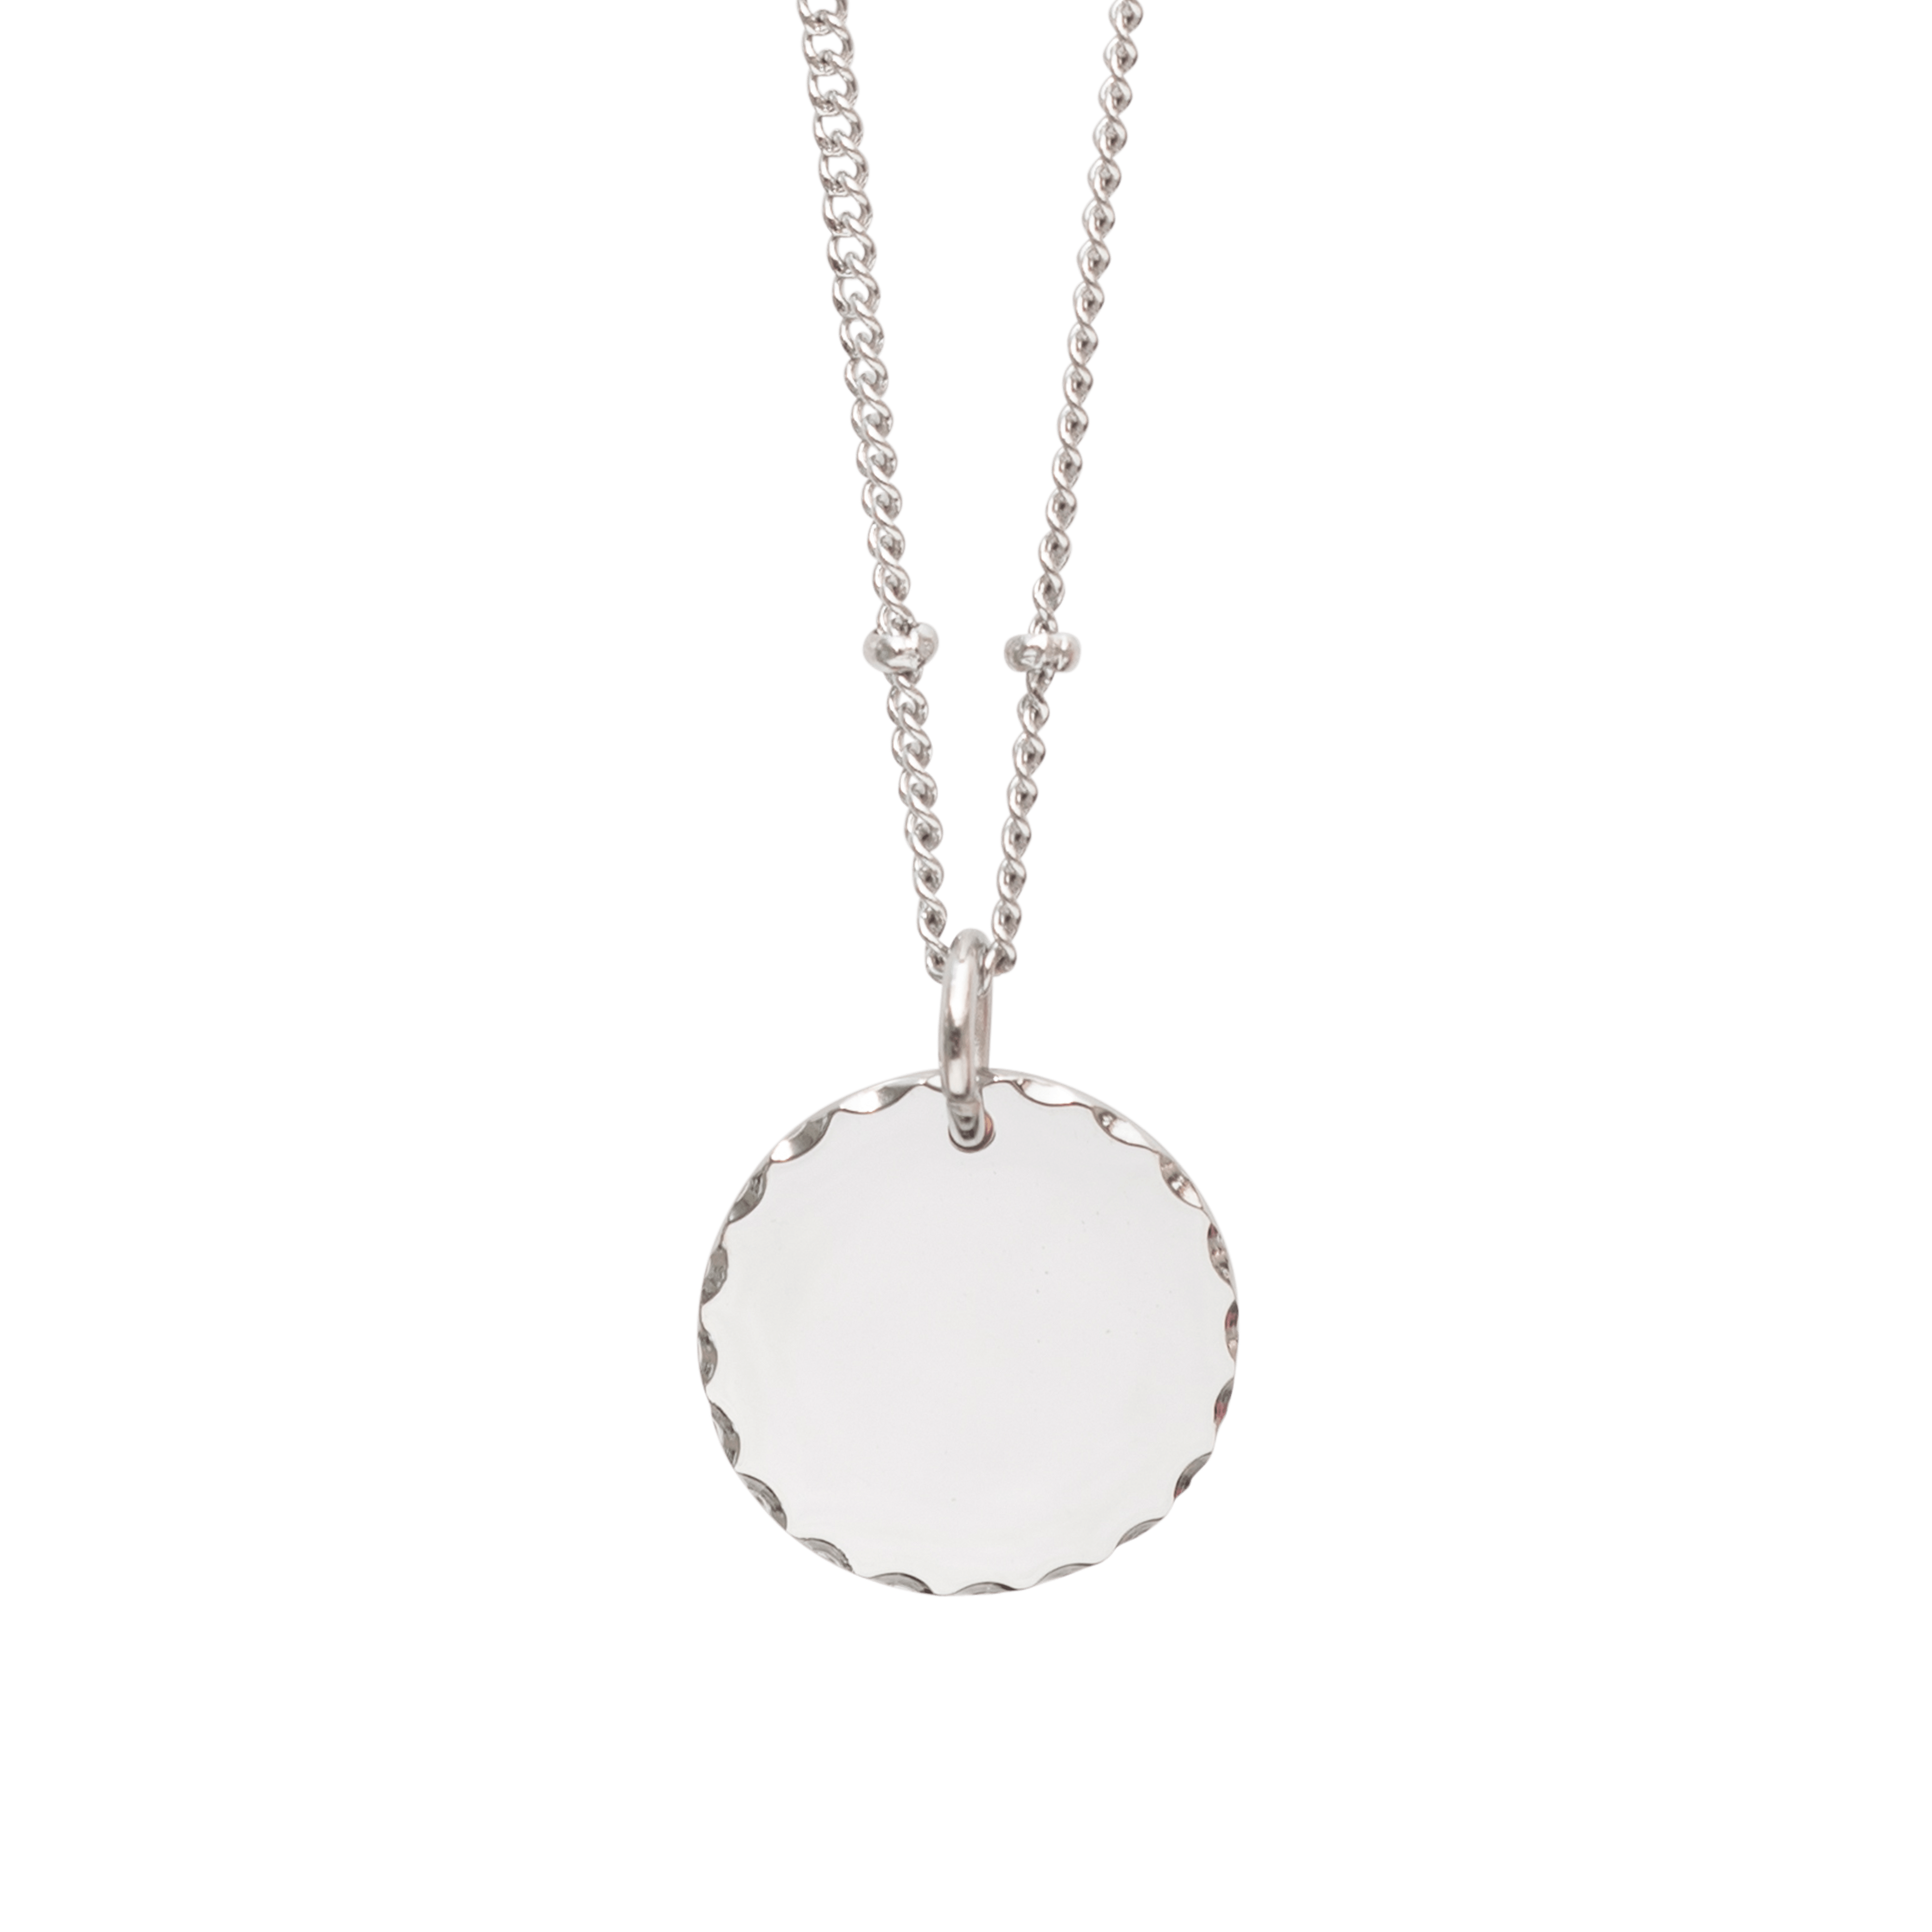 Necklace with name round silver